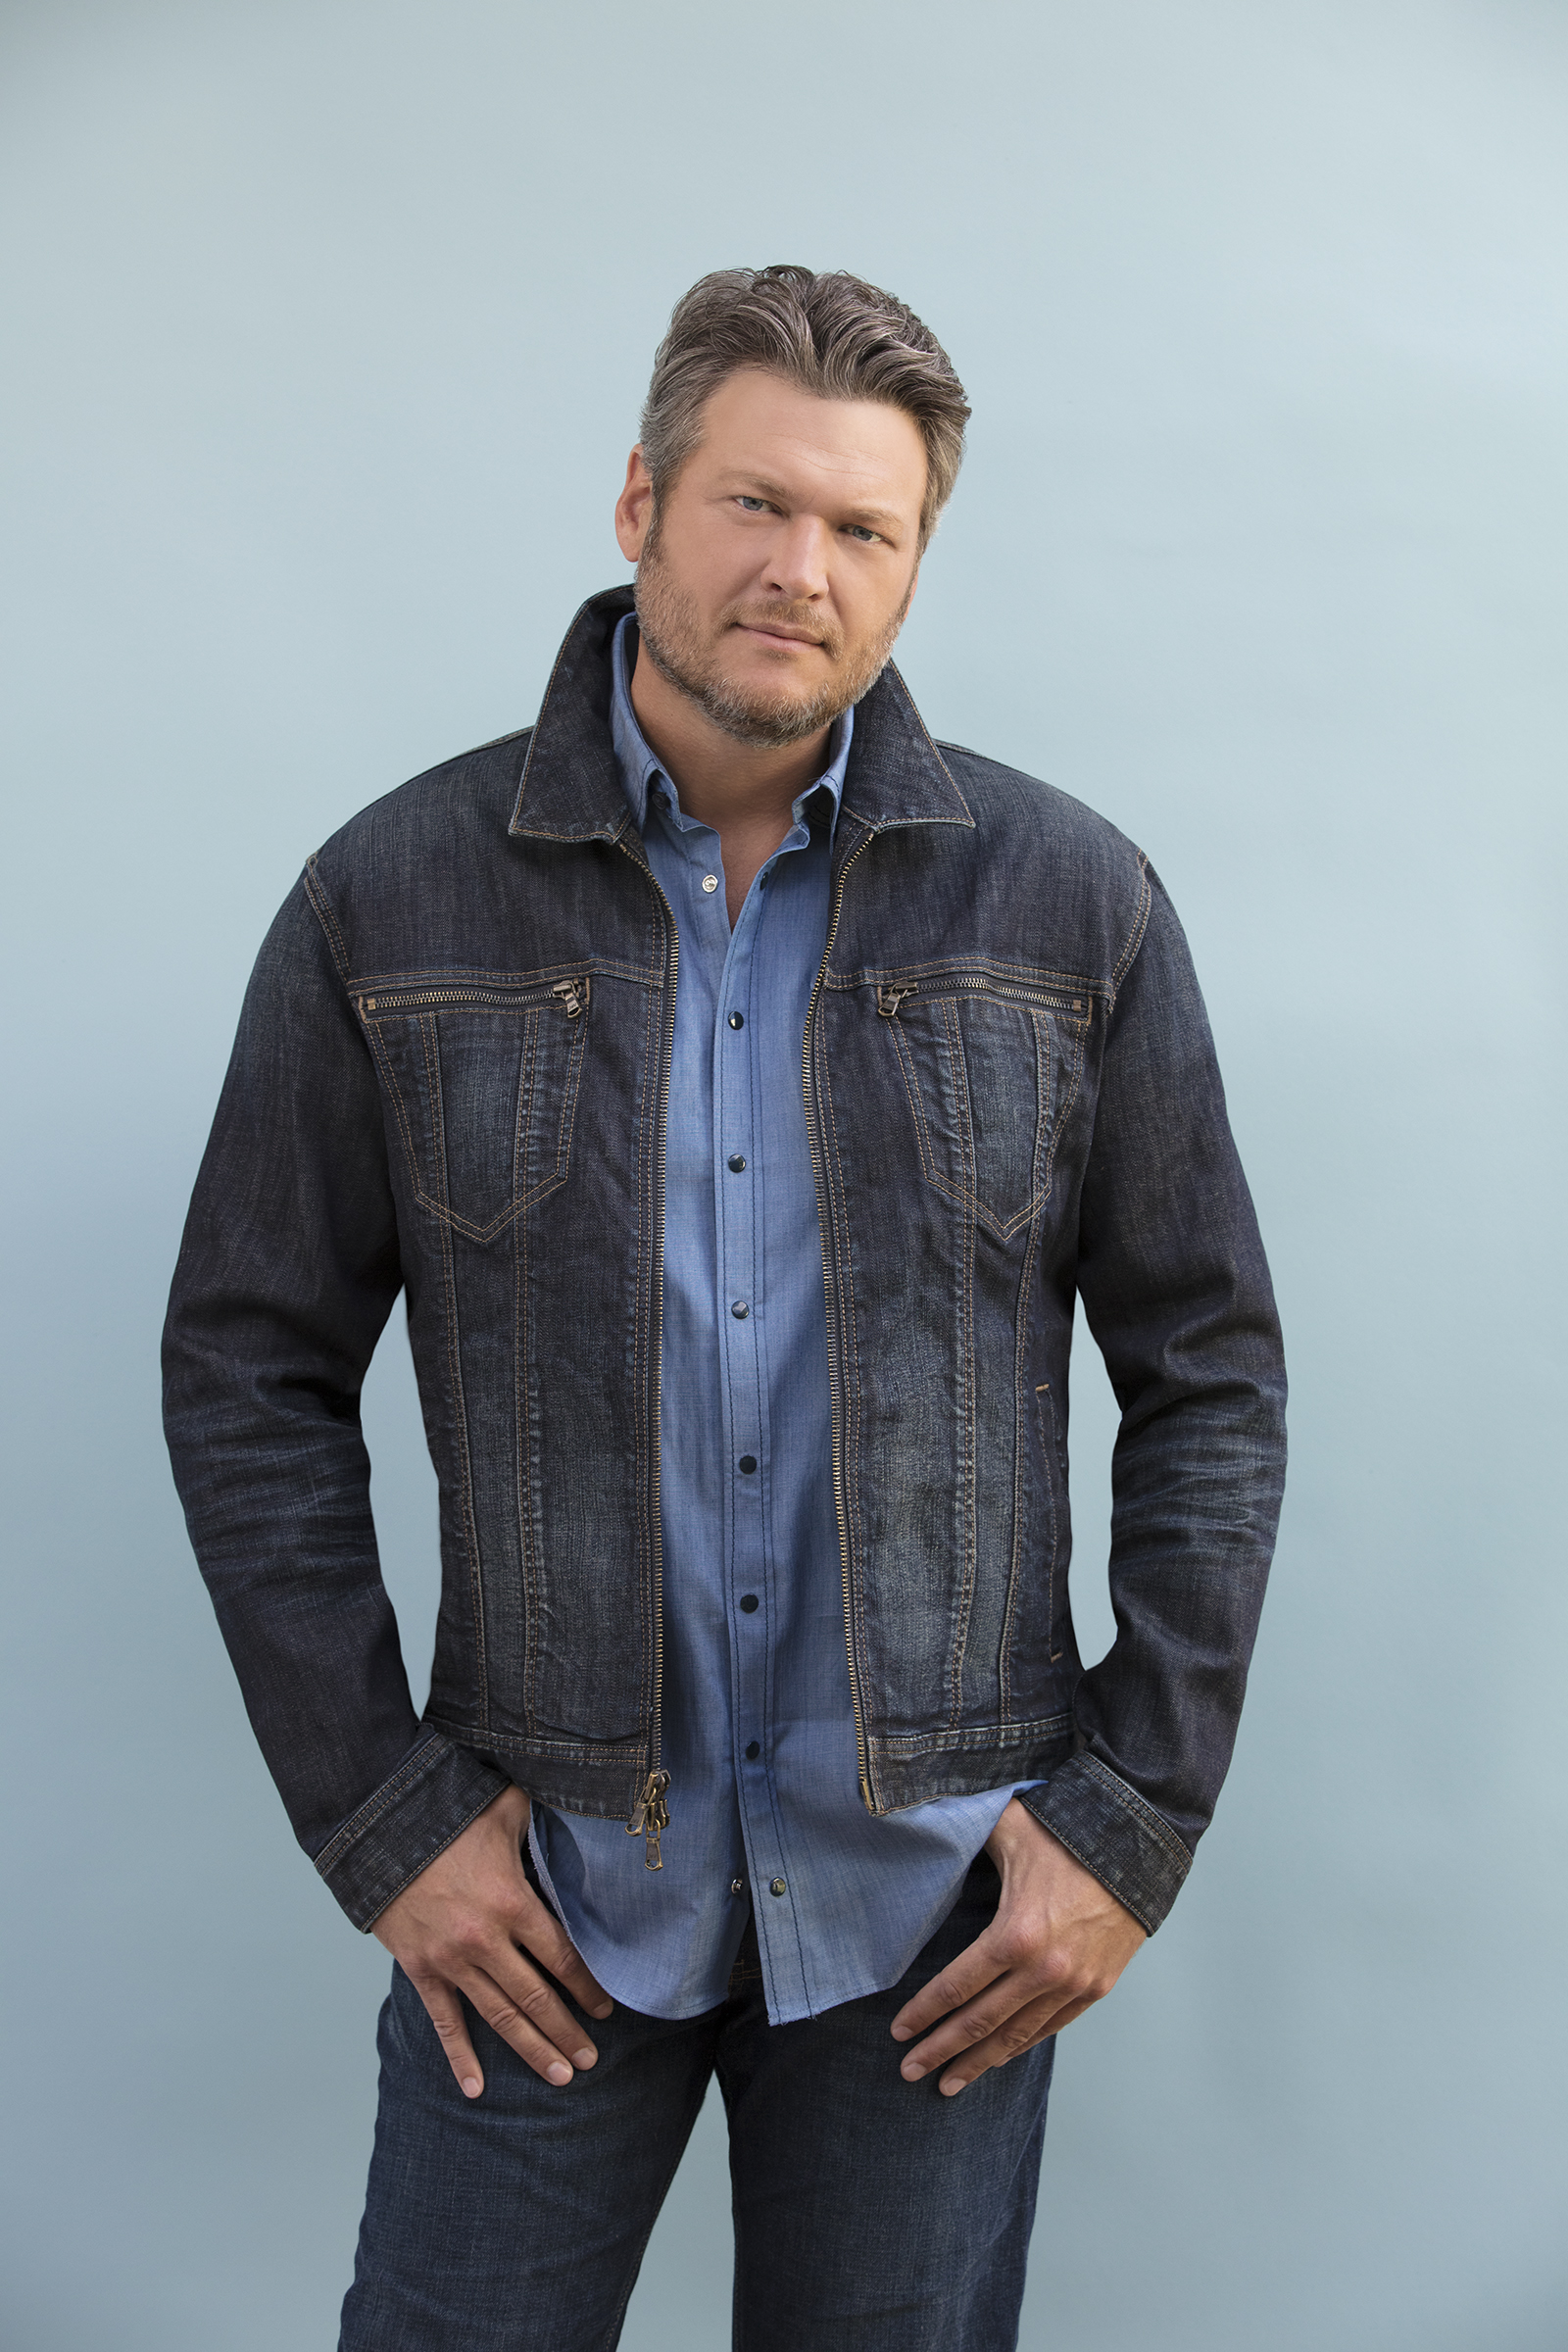 Blake Shelton Takes Two Texoma Shore Tracks to Today in Surprise Appearance Ahead of Friday Album Launch